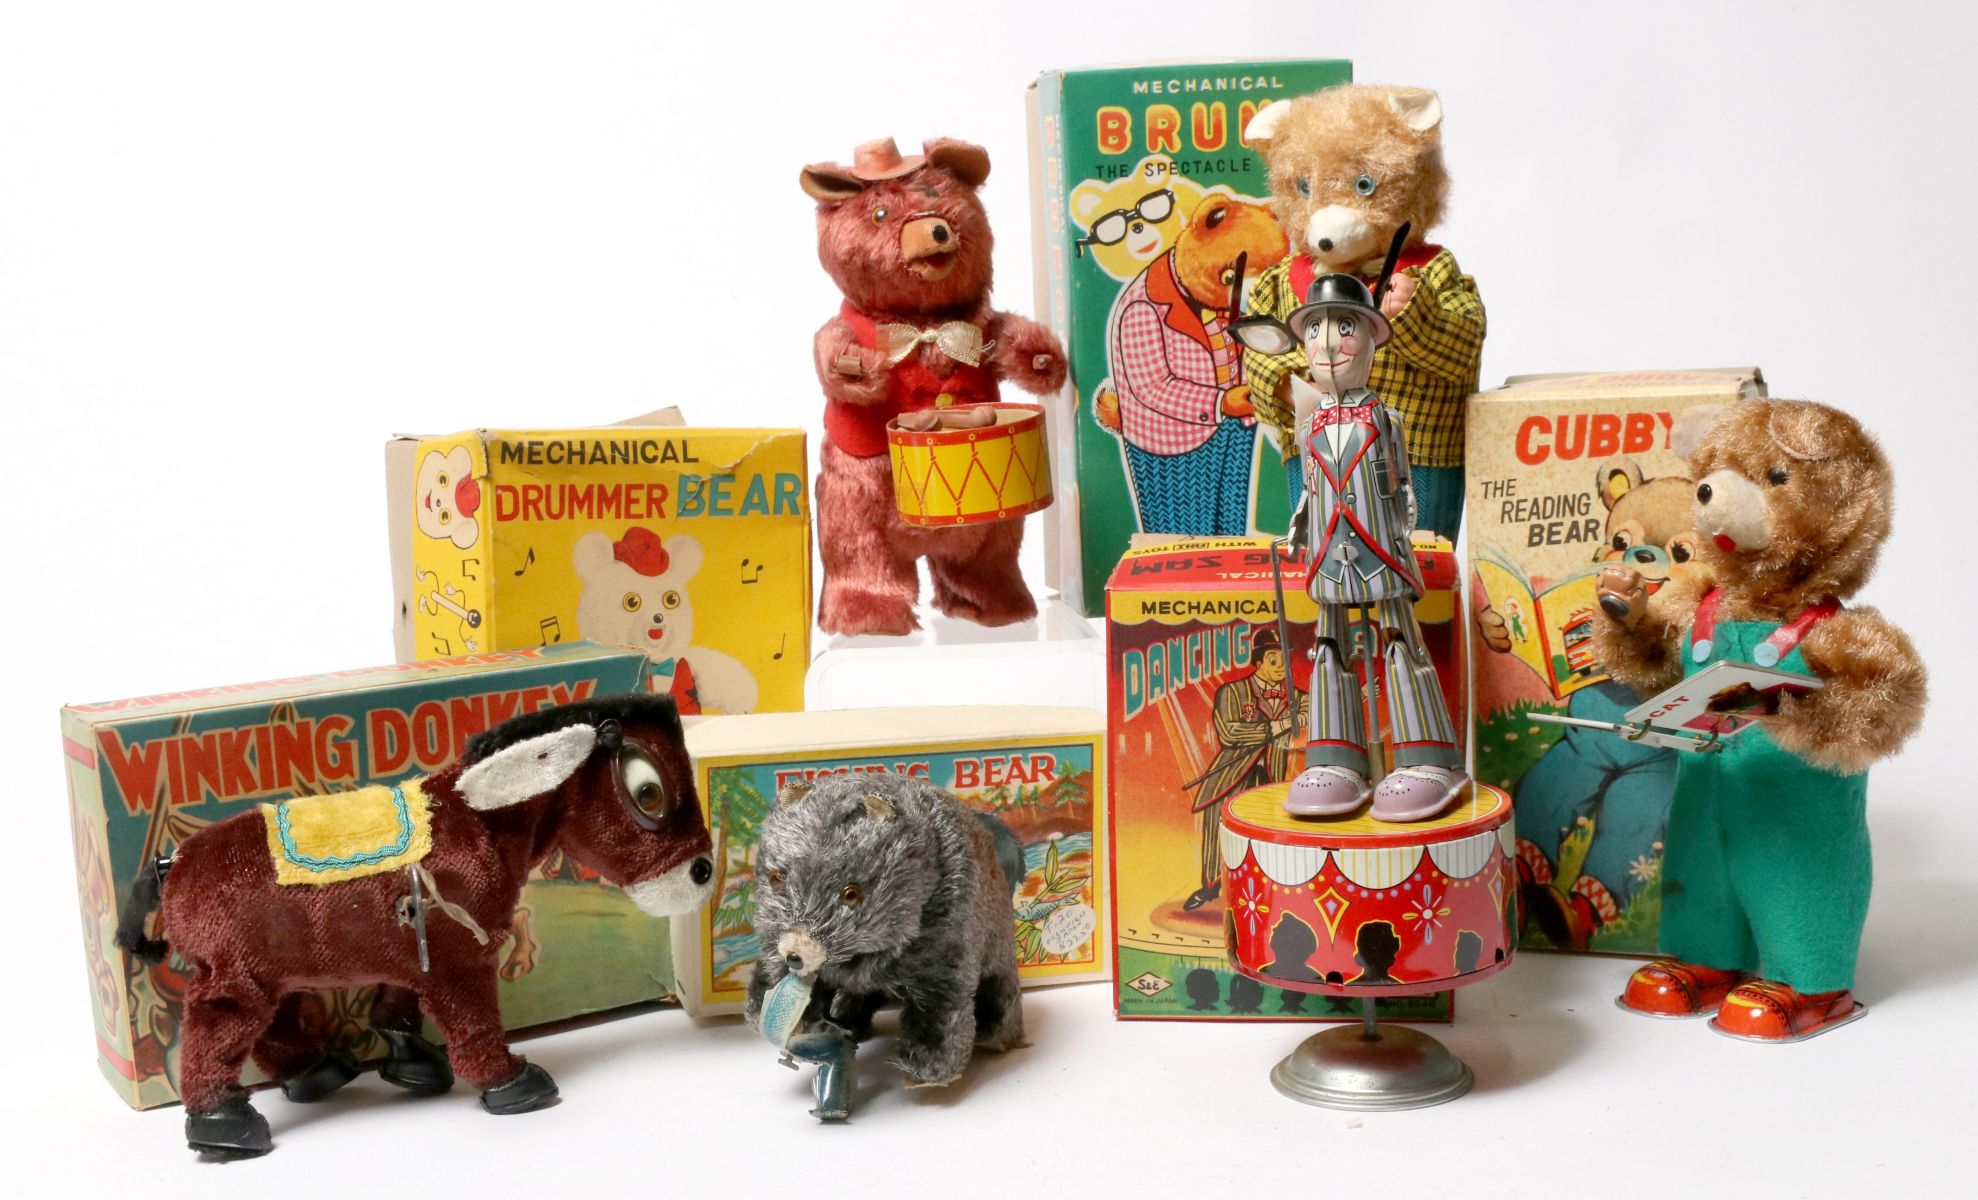 A COLLECTION OF VINTAGE WIND-UP TOYS IN ORIG BOX